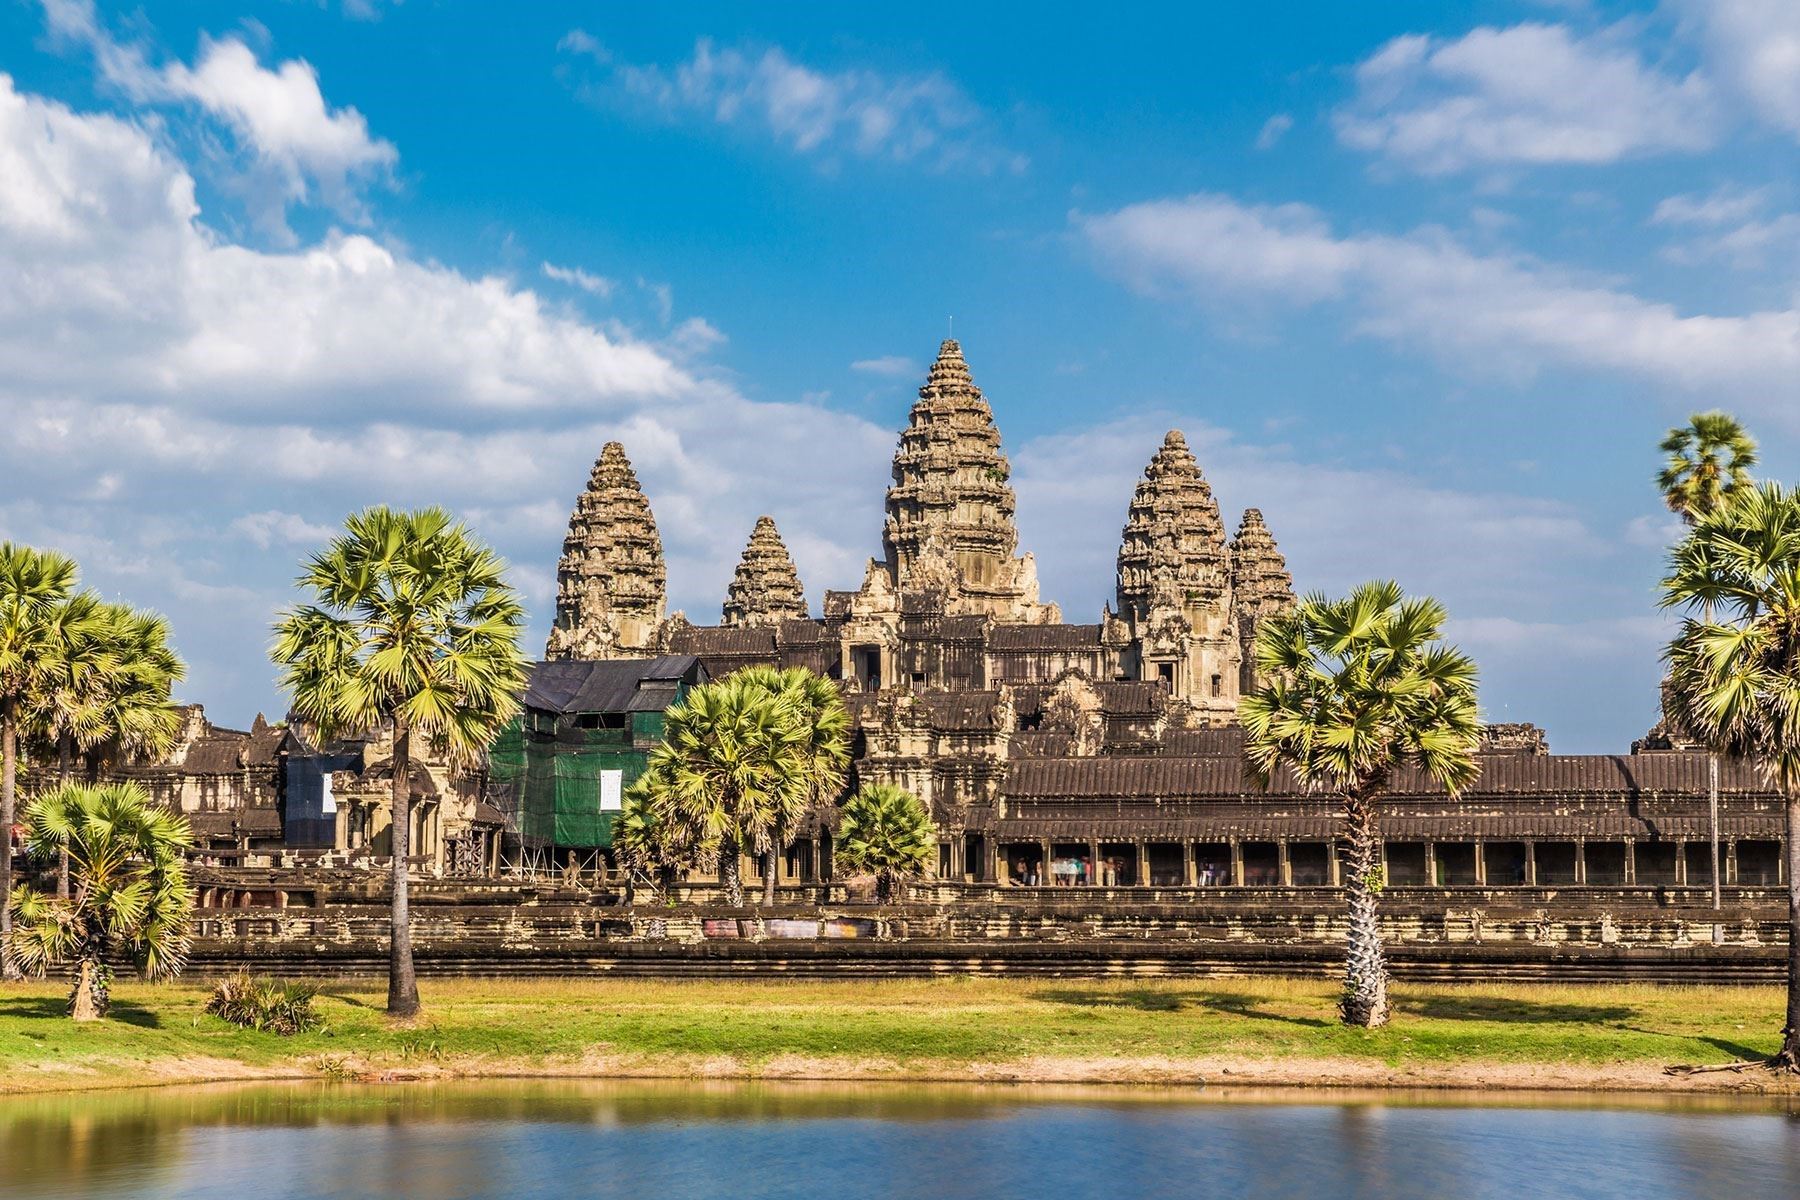 Siem Reap is rightly renowned for its "awe-inspiring beauty", most famously at the temple complex of Angkor Wat, but respondents to the survey were also taken with the "resiliency and kindness of the Cambodian people".